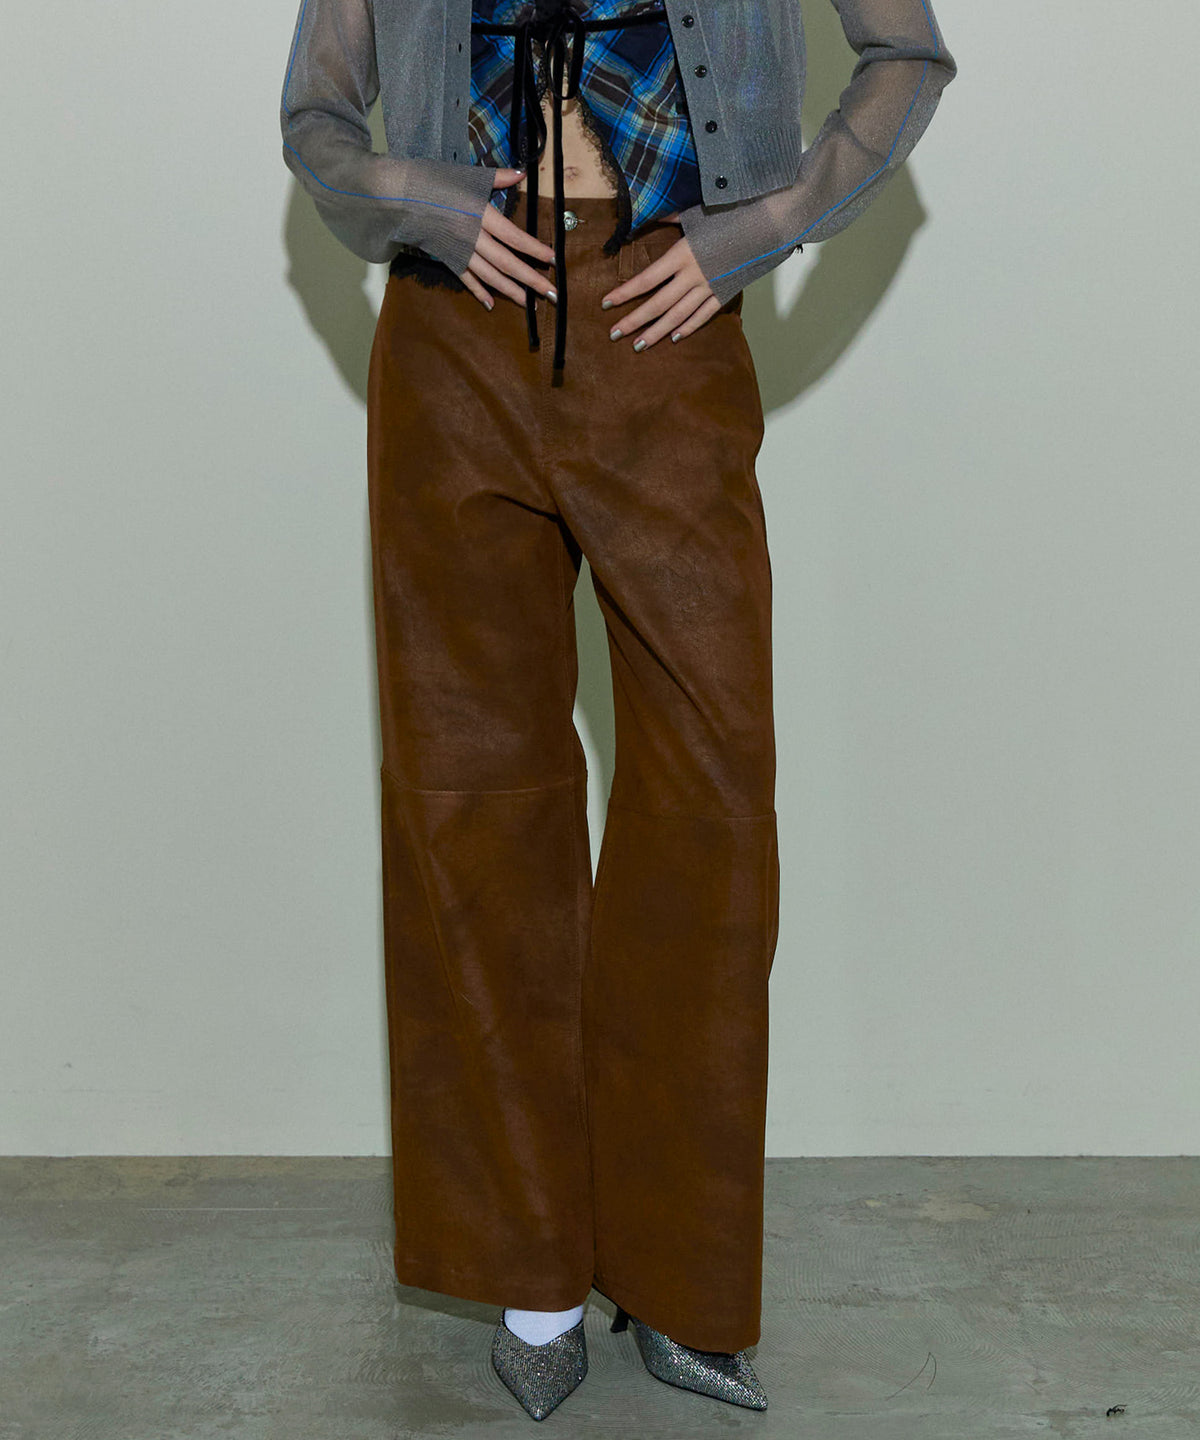 【24AUTUMN PRE-ORDER】Vegan Leather Wide Straight Pants